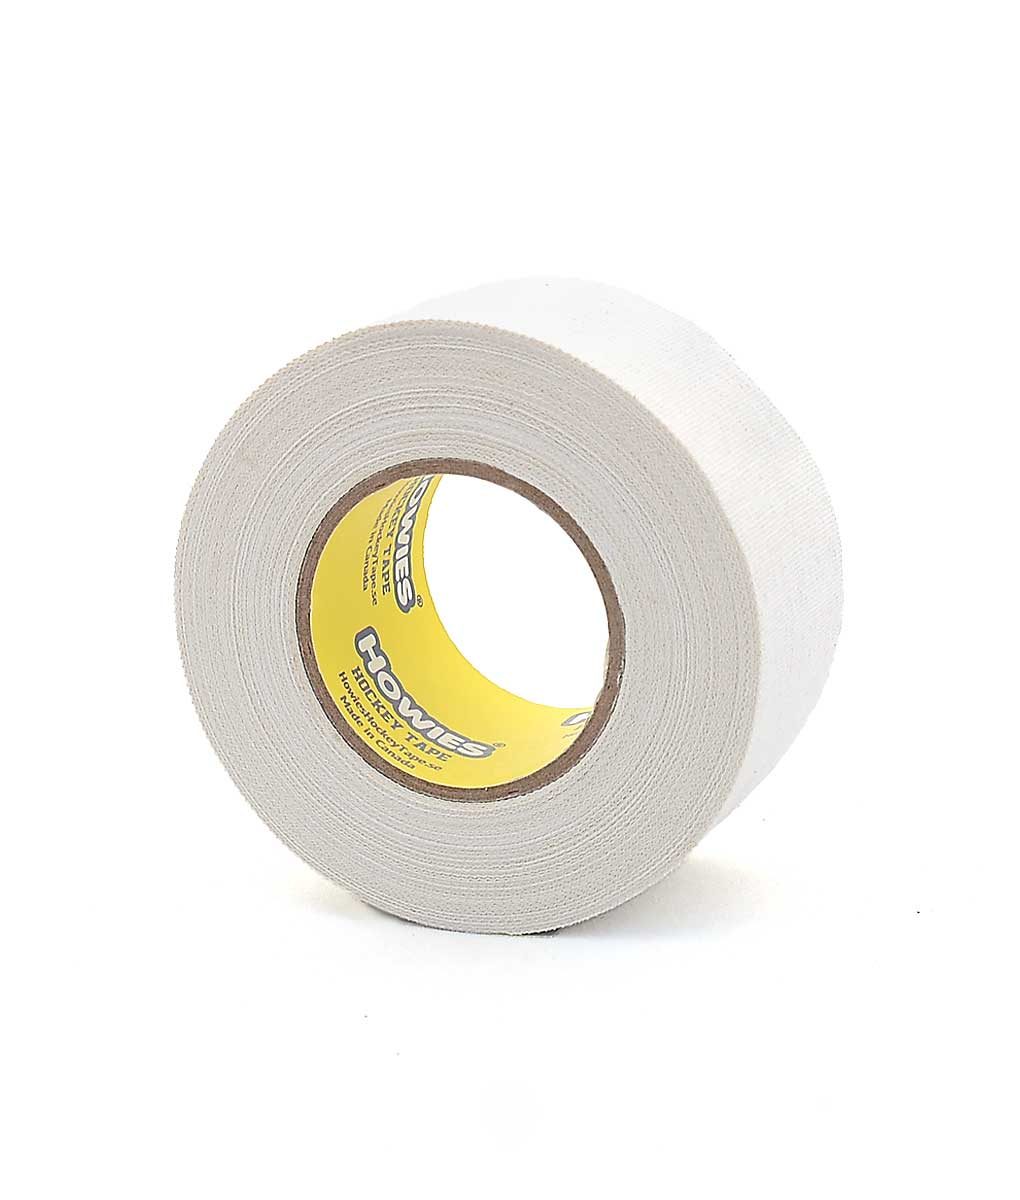 Howies White Cloth Hockey Tape 36mm